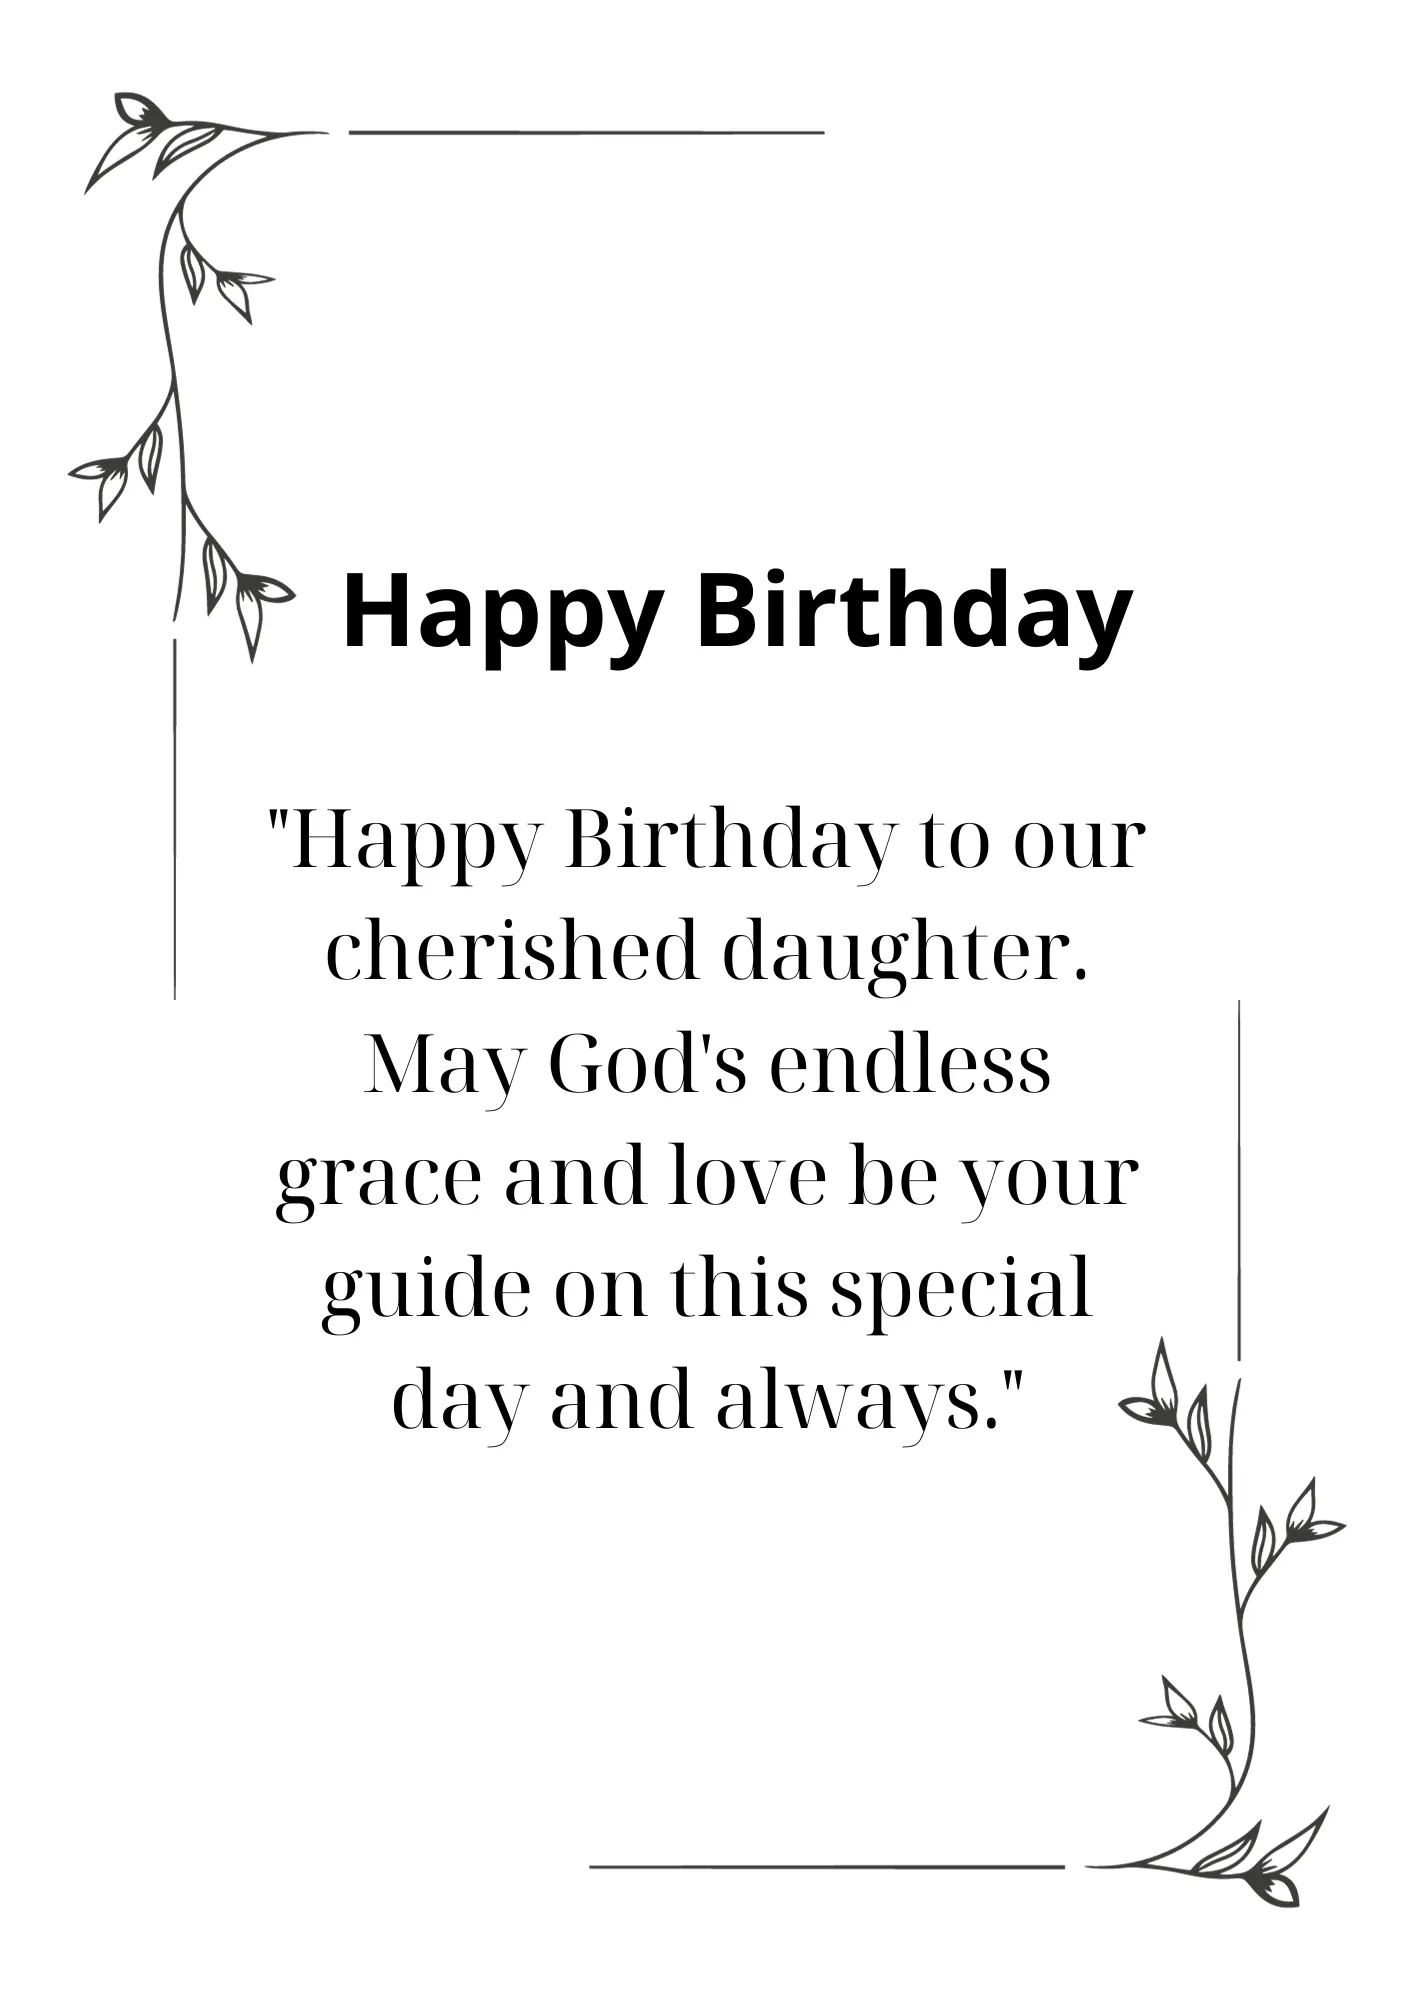 Religious Christian Birthday Wishes for Daughters